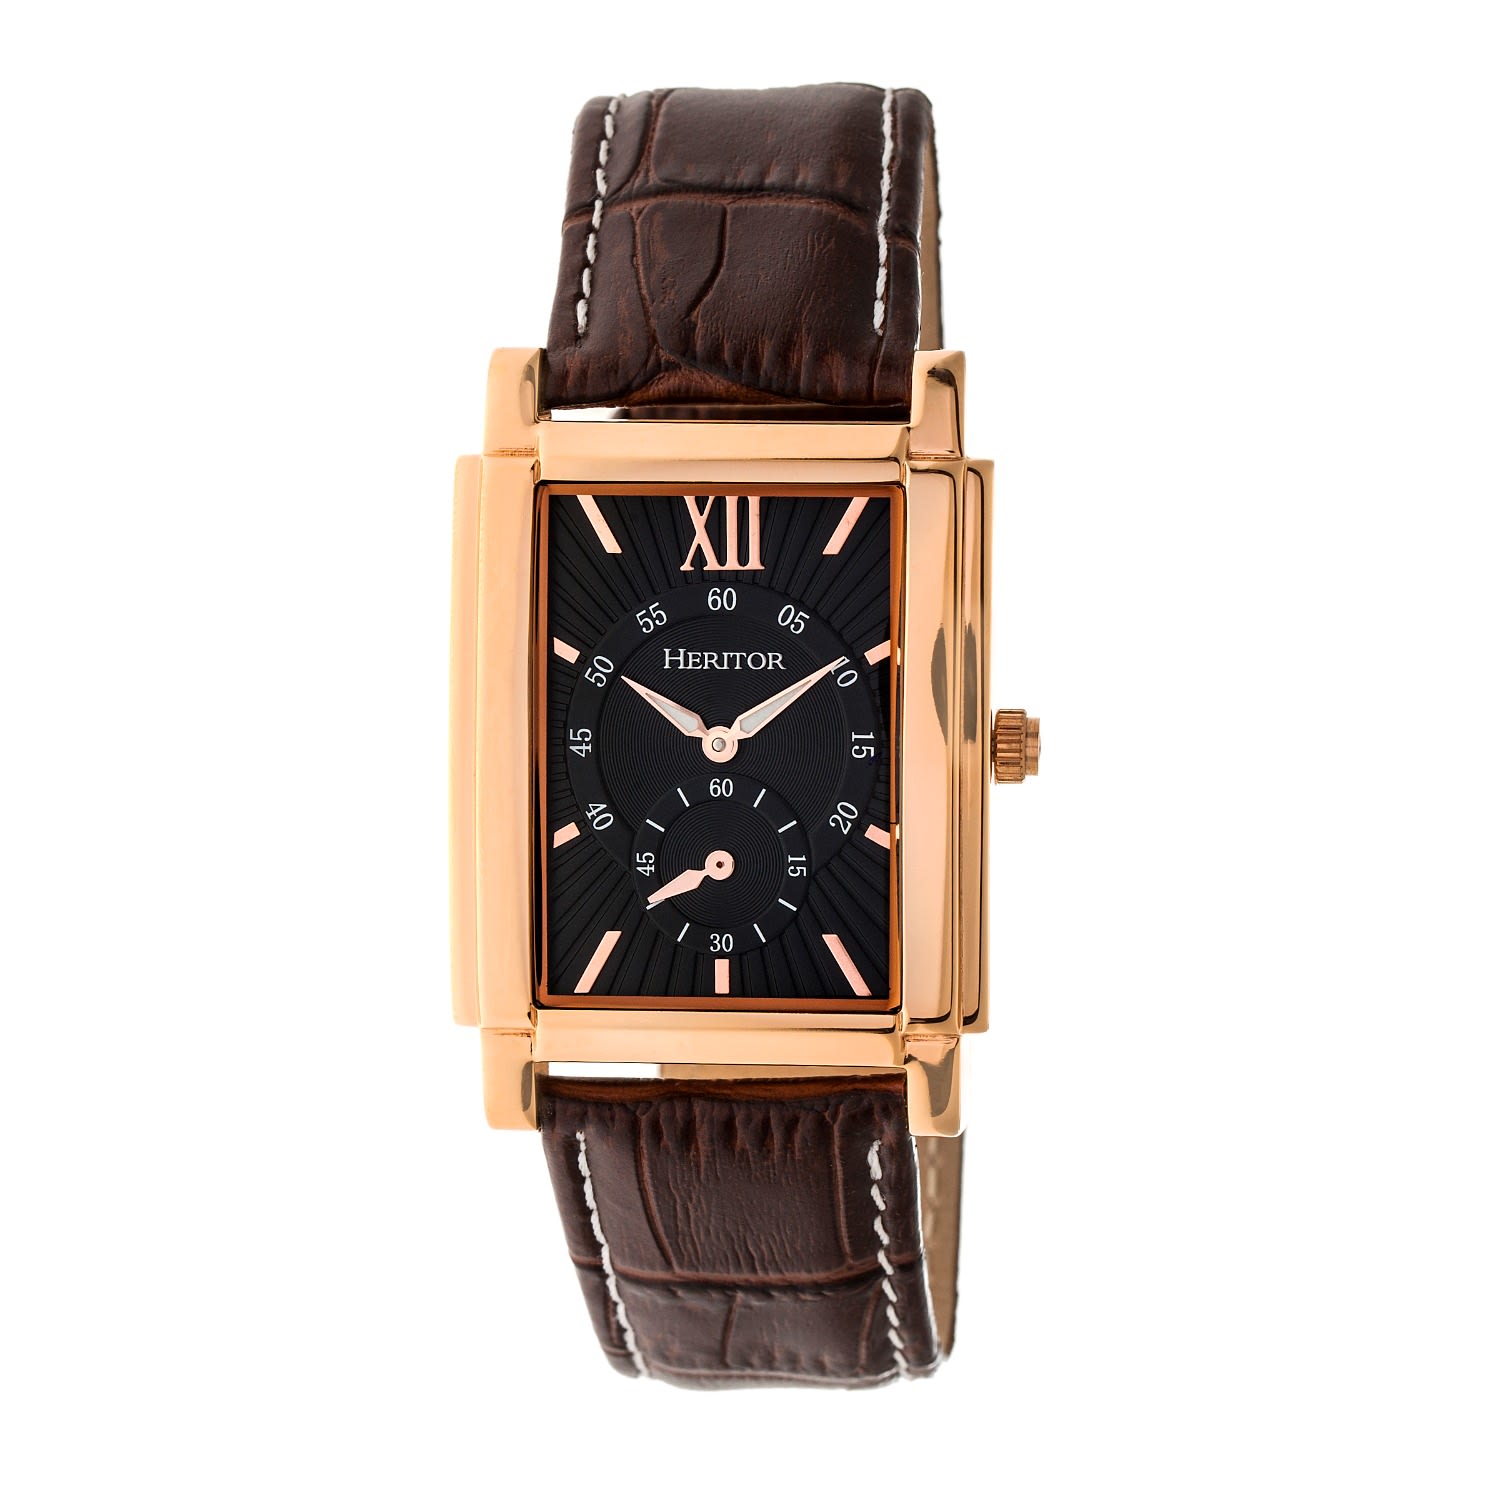 Men’s Black / Rose Gold Frederick Leather-Band Watch With Seconds Sub-Dial - Black, Rose Gold One Size Heritor Automatic